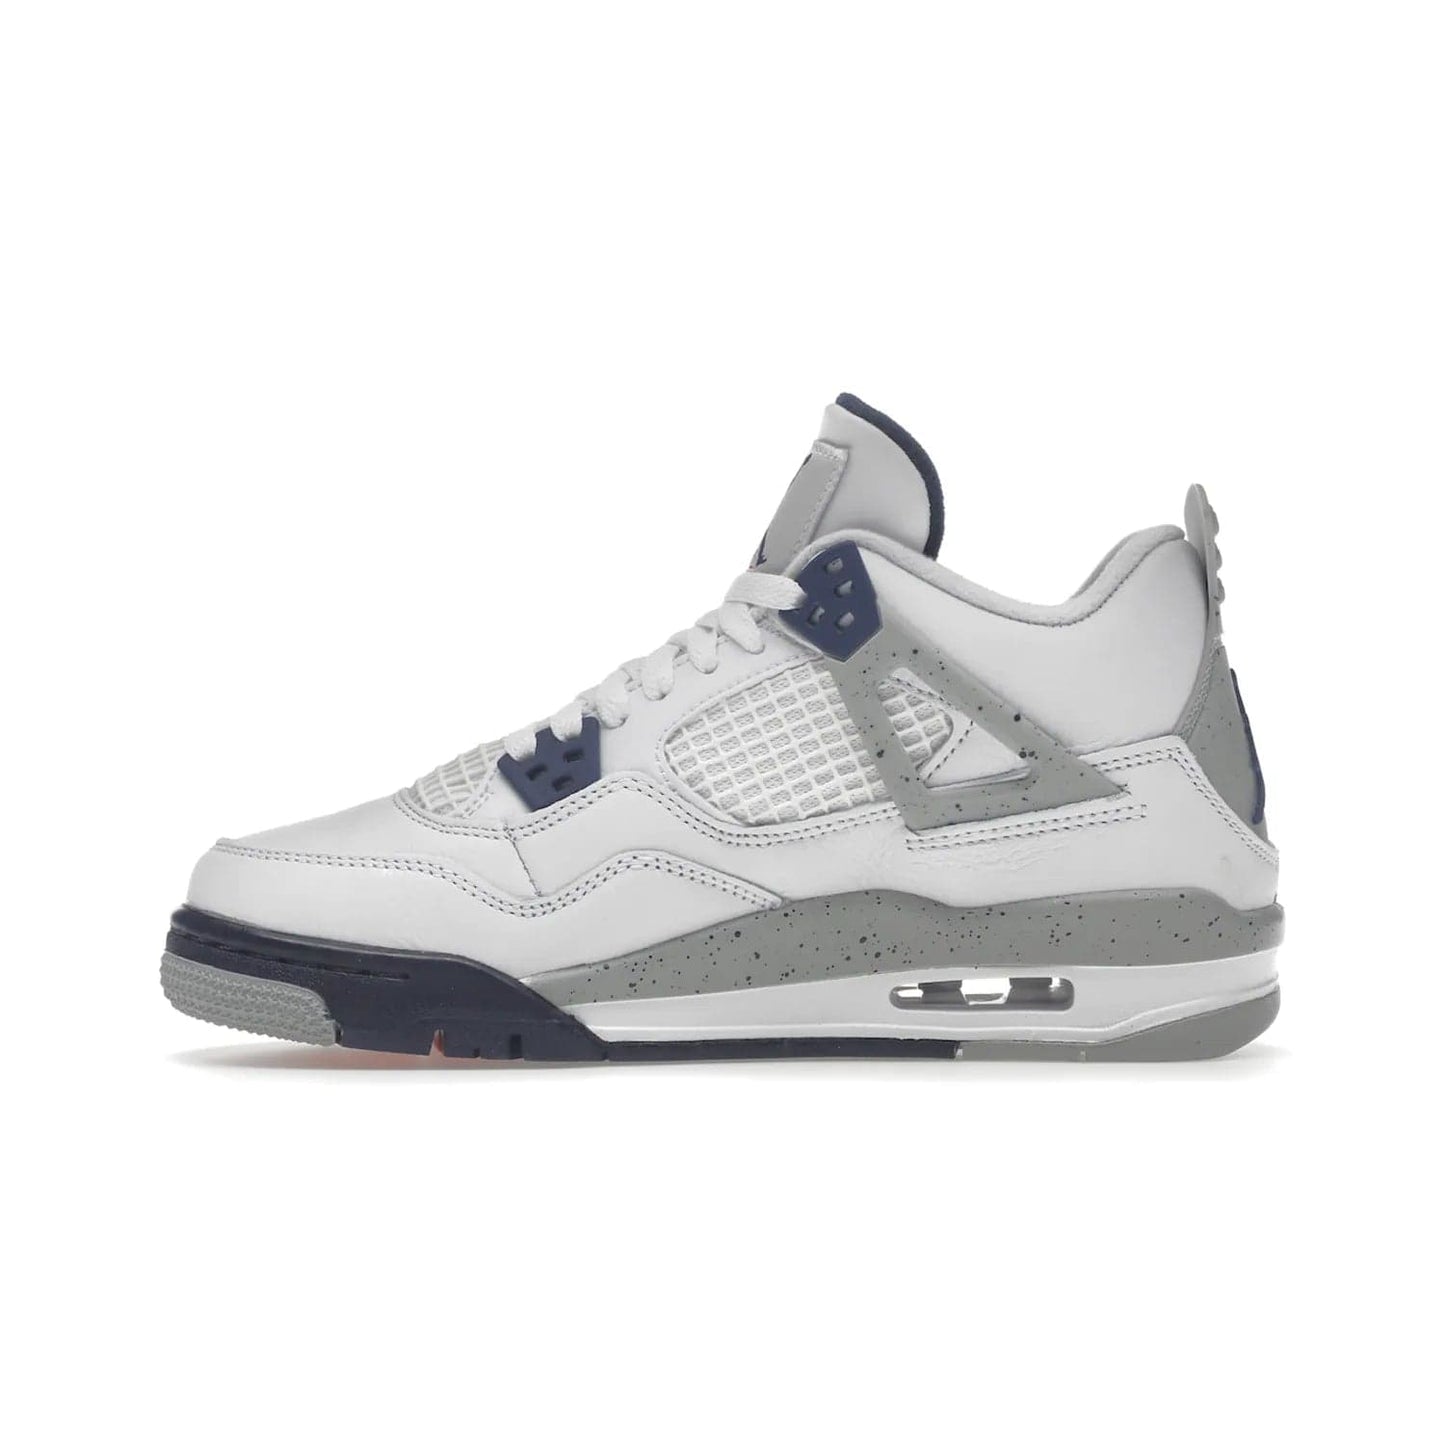 Jordan 4 Retro Midnight Navy (GS) - Image 19 - Only at www.BallersClubKickz.com - Shop the Air Jordan 4 Retro Midnight Navy GS. The white leather upper features black support wings & heel tab, navy eyelets & woven tongue tag with Jumpman logos. The midsole features two-tone polyurethane insole & AIR units in the heel & forefoot. Get the white/midnight navy/light smoke grey/fire colorway & show off your style.